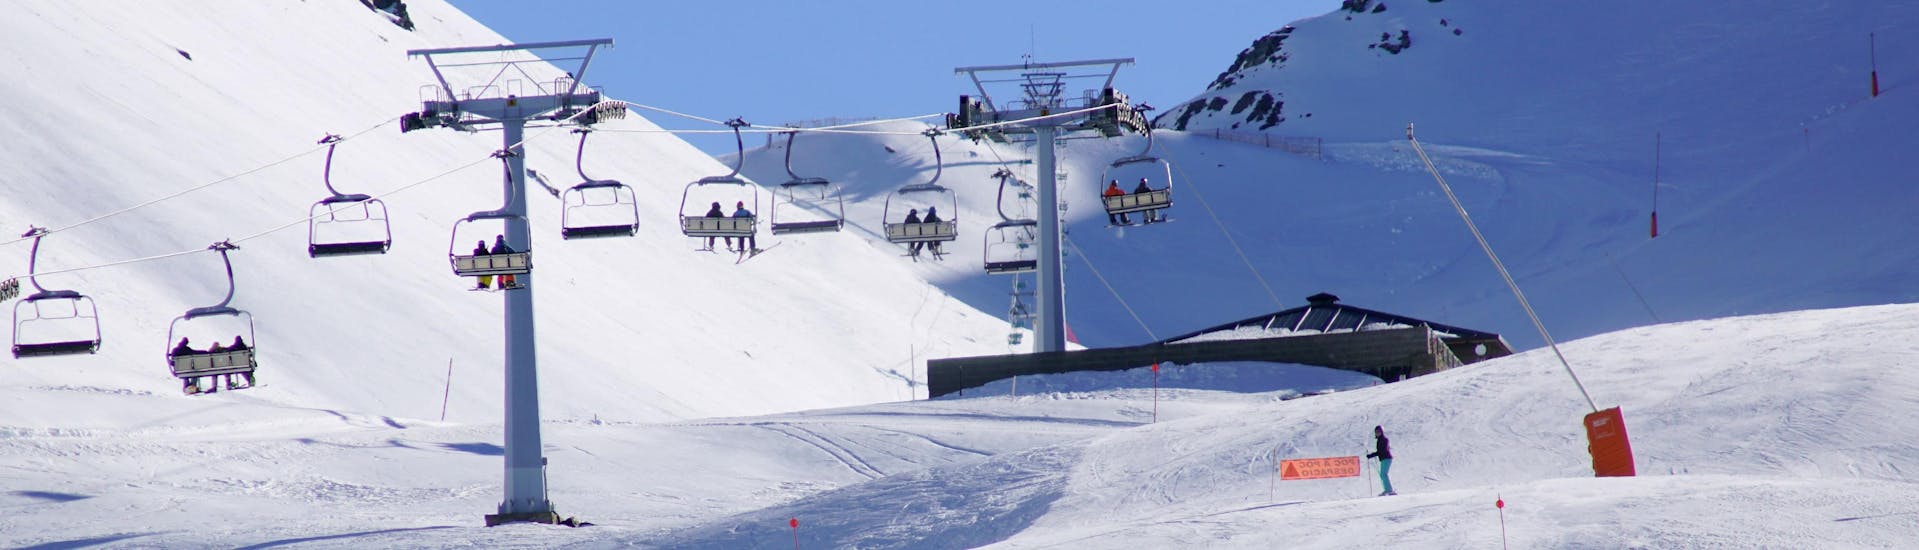 An image of one of the ski slopes in the catalan ski resort of Boí Taüll, where visitors can book ski lessons with the local ski schools.